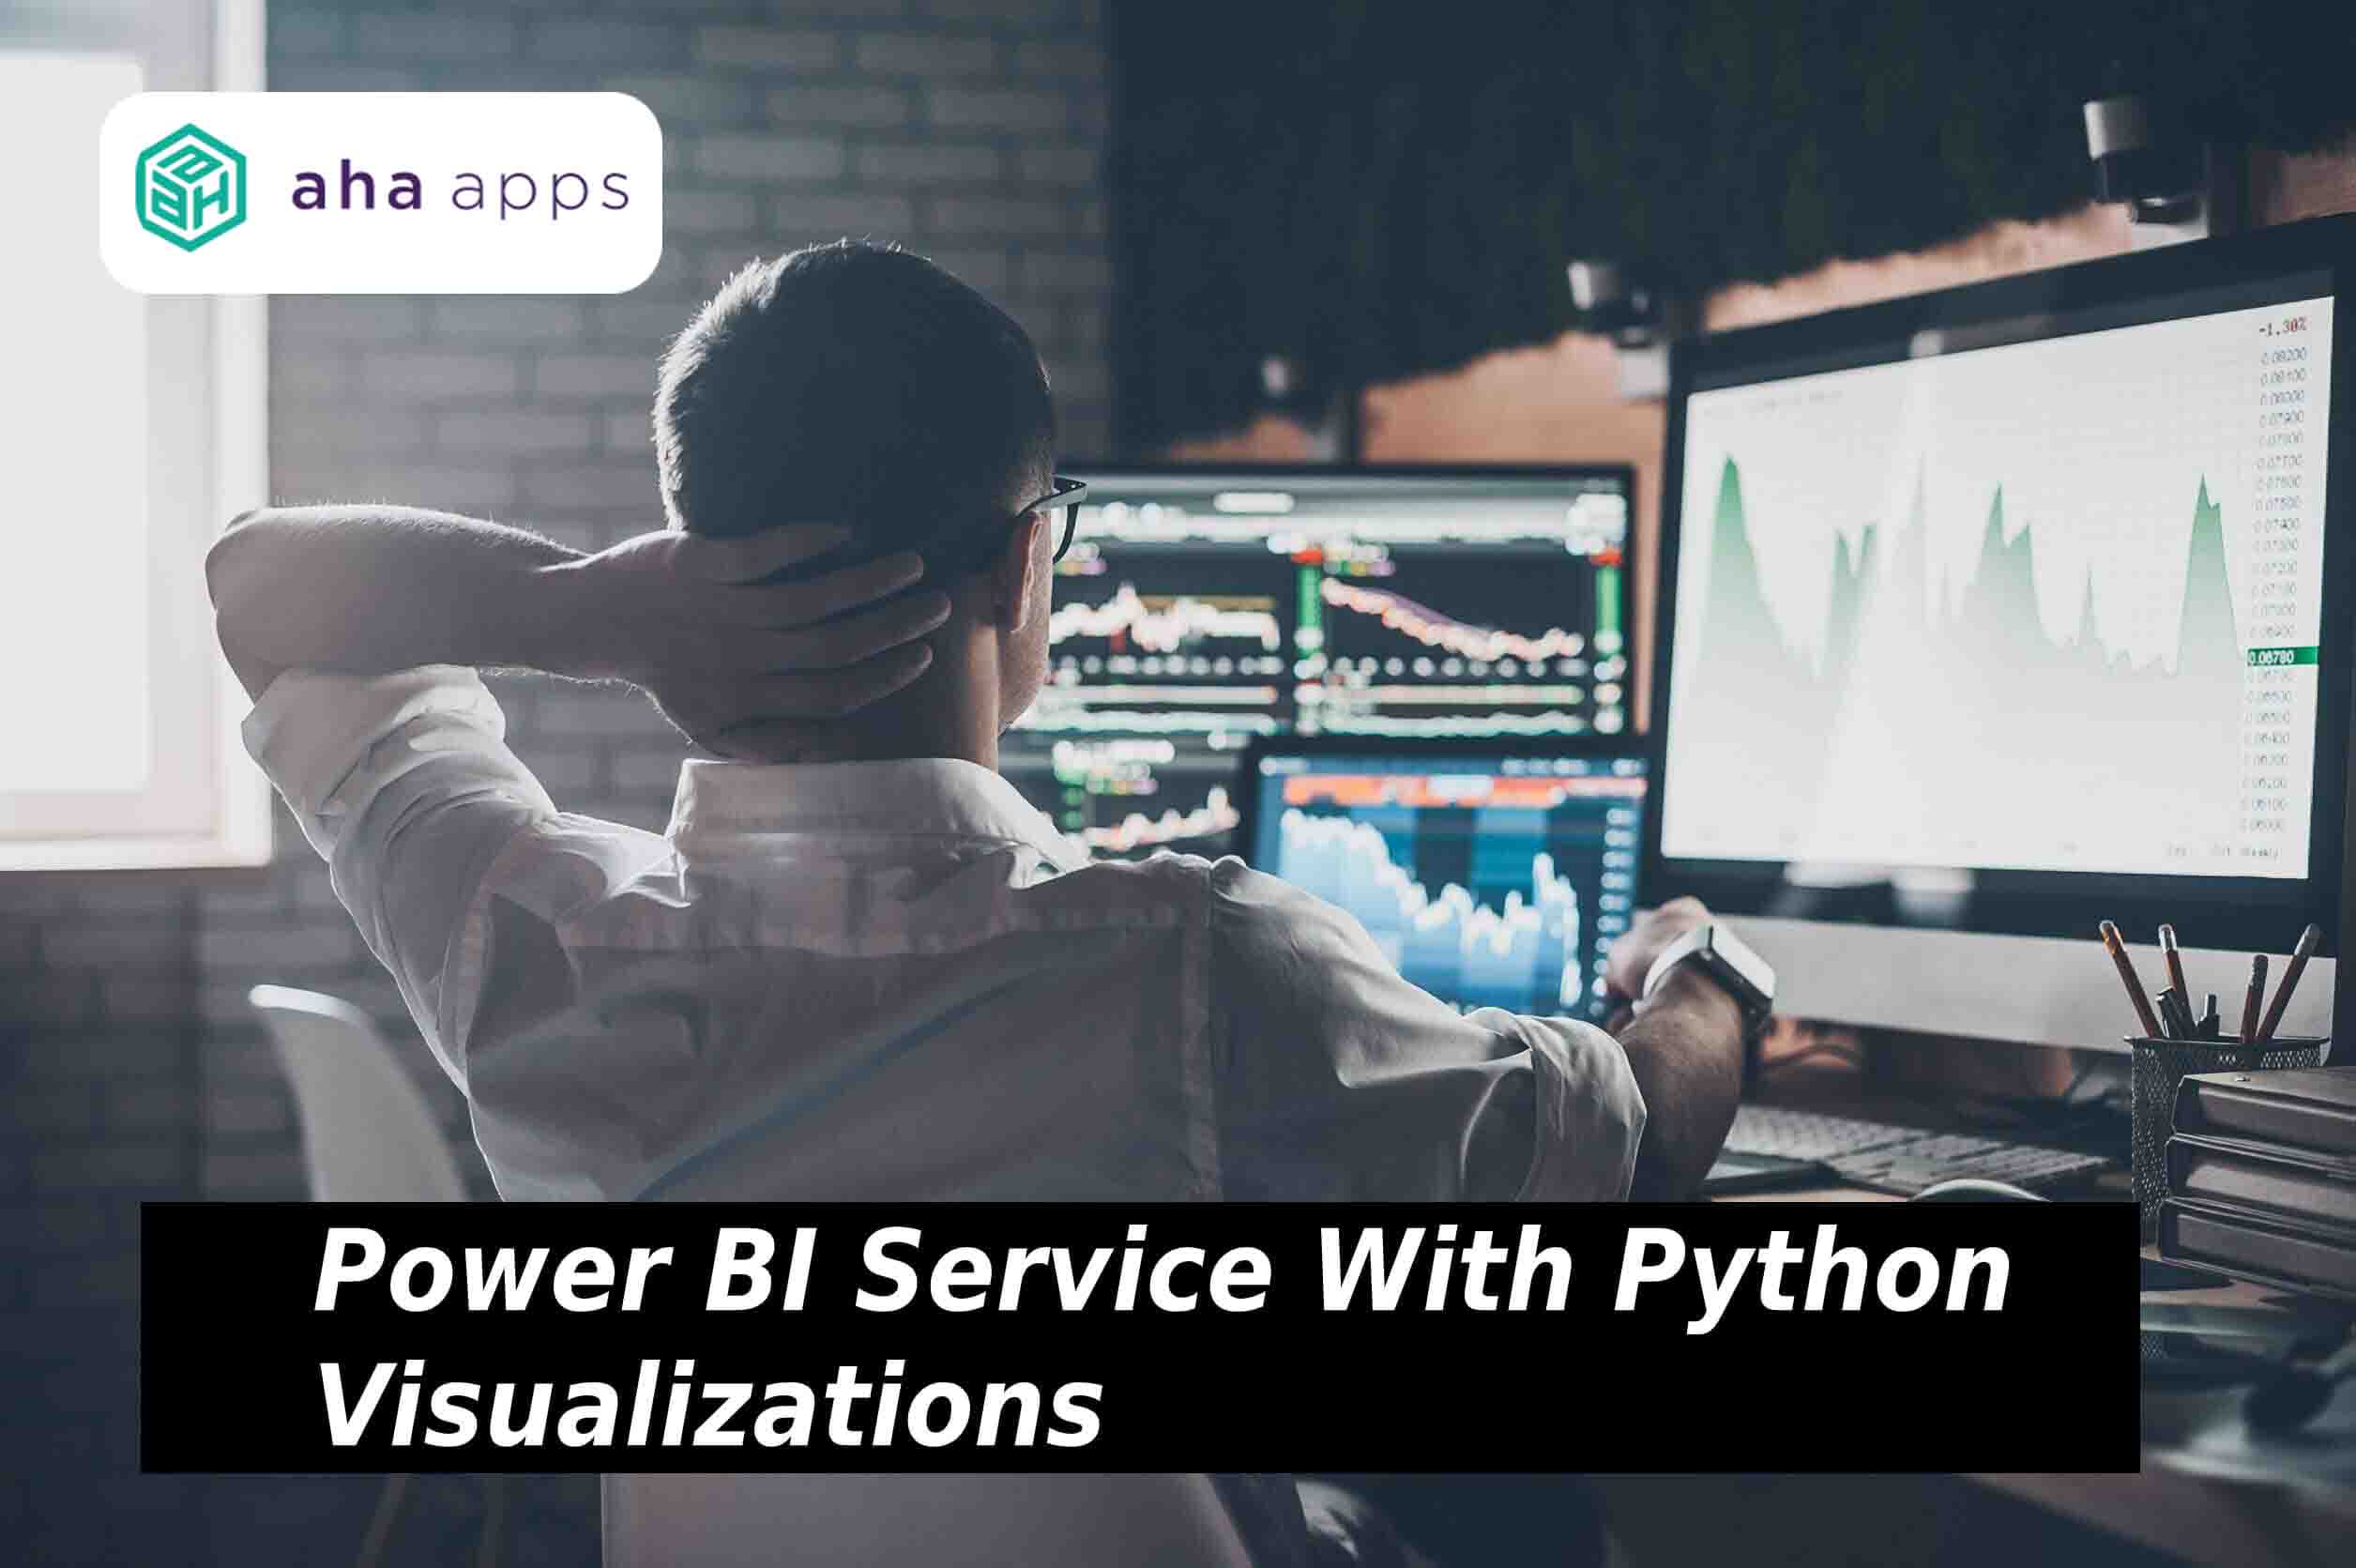 Power BI Service with Python visualizations - AhaApps